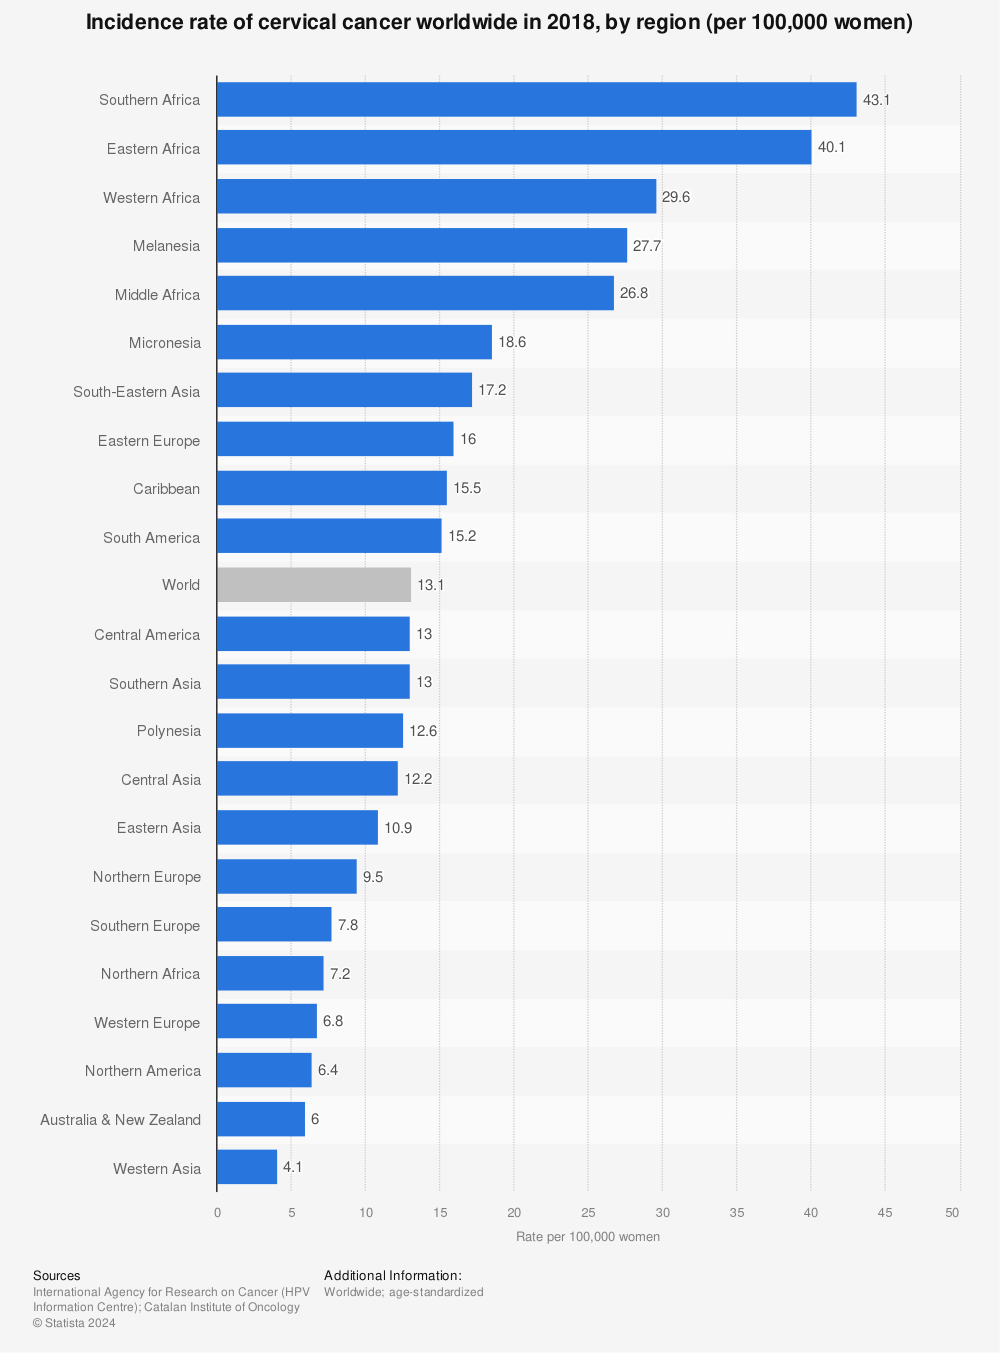 Statistic: Incidence rate of cervical cancer worldwide in 2018, by region (per 100,000 women) | Statista